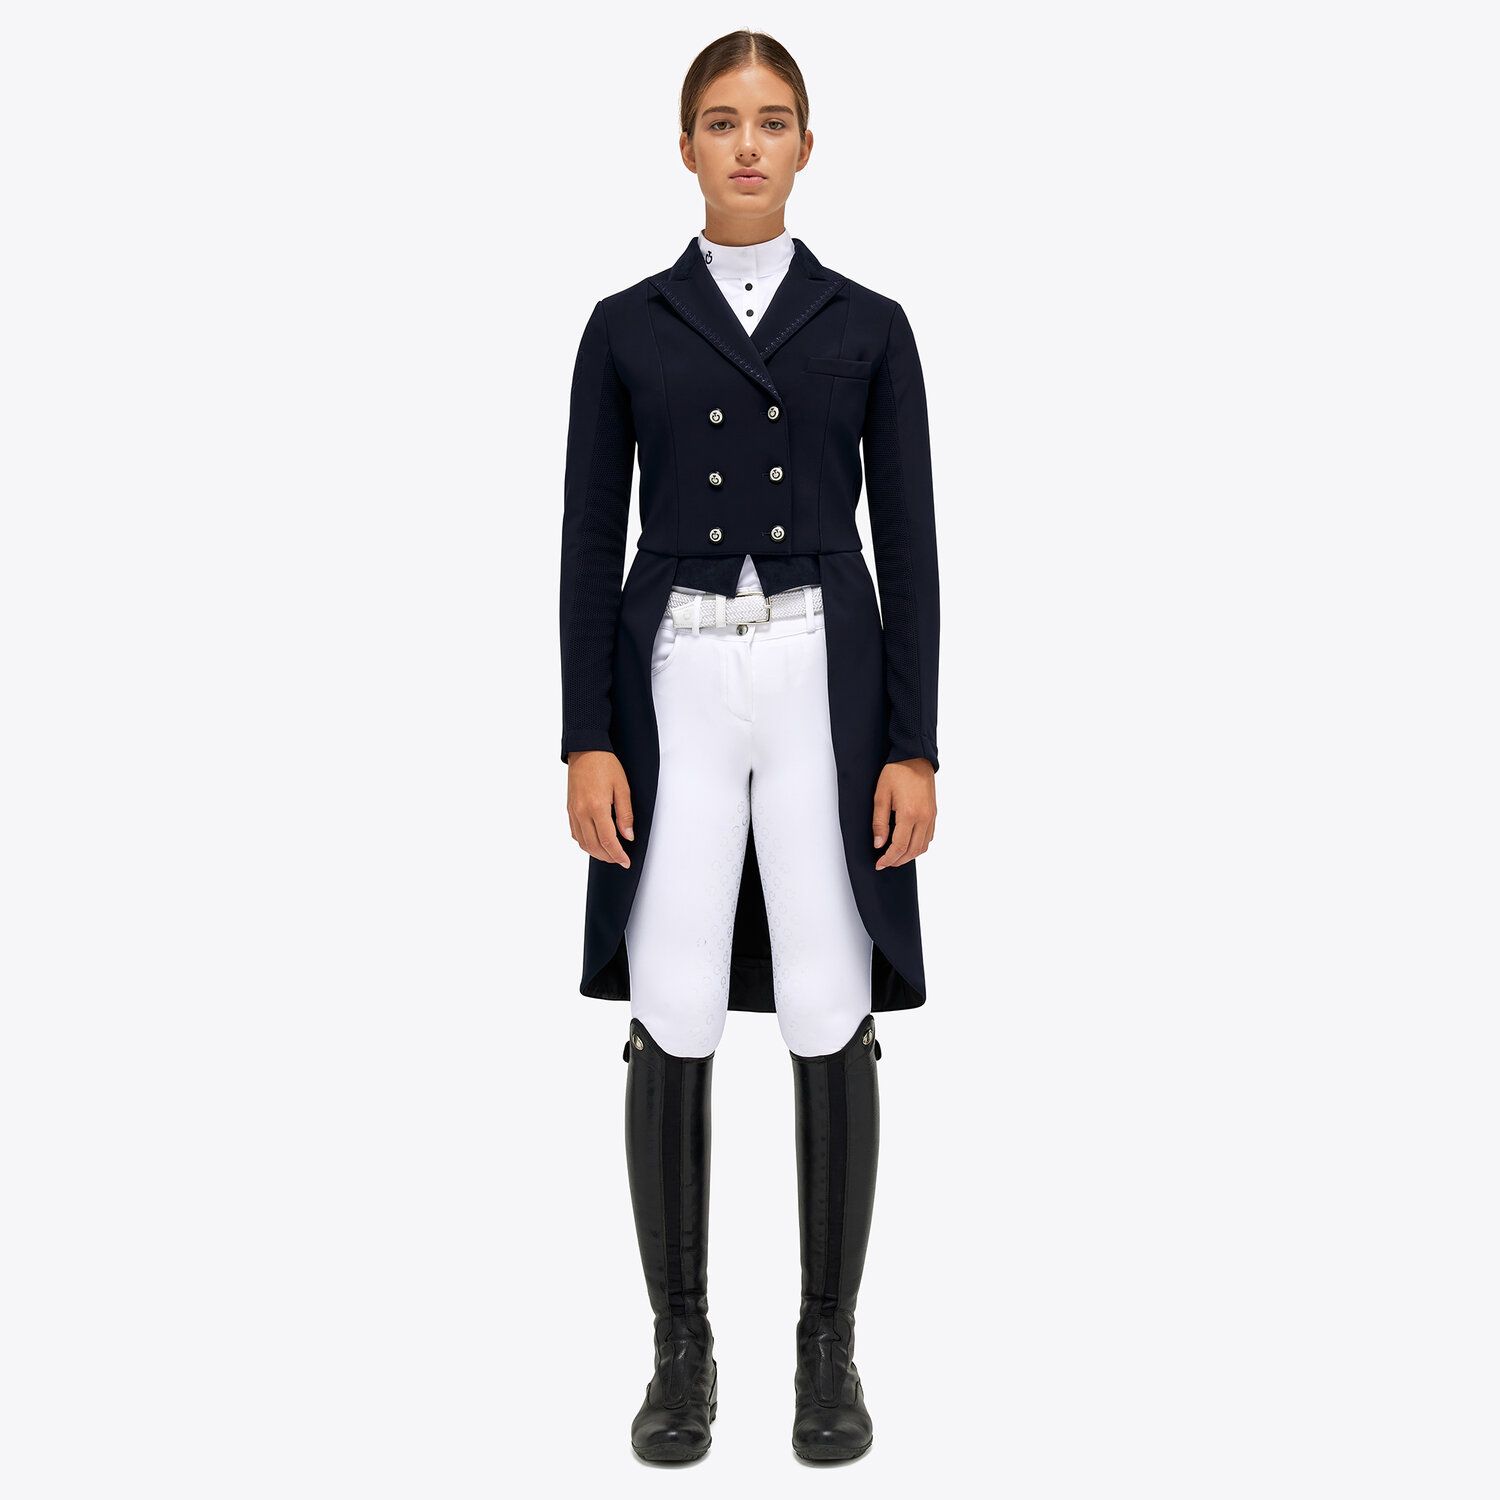 Cavalleria Toscana Women's tailcoat with covered b NAVY-1